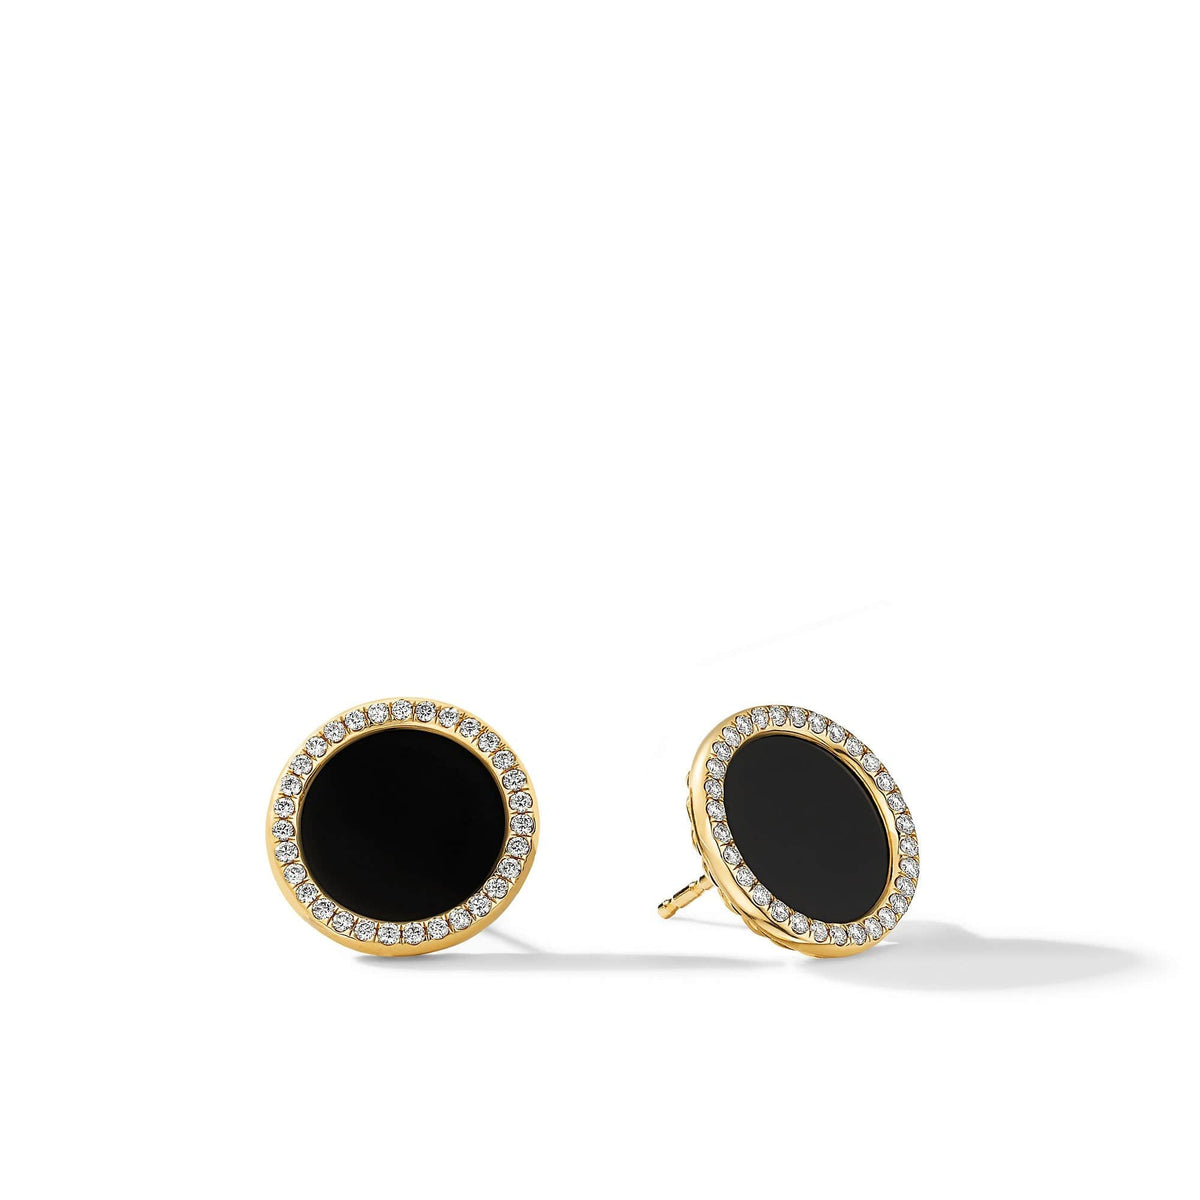 DY Elements Button Earrings in 18K Yellow Gold with Black Onyx and Pavé Diamonds